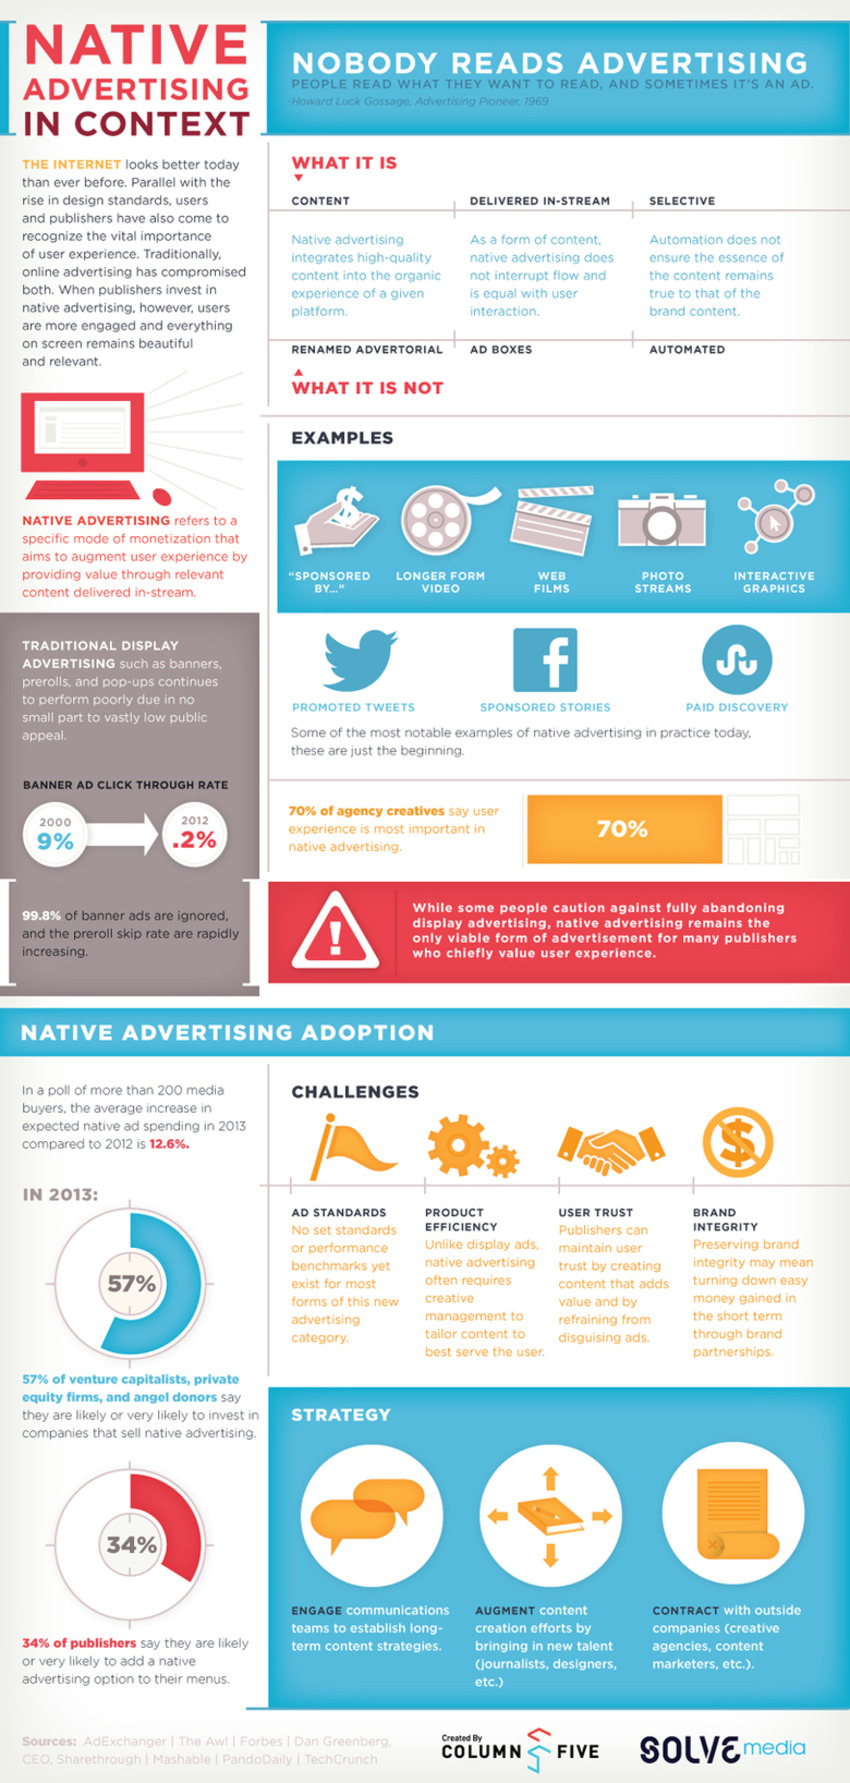 Evaluating Native Advertising in Context [INFOGRAPHIC] - Contently | The MarTech Digest | Scoop.it